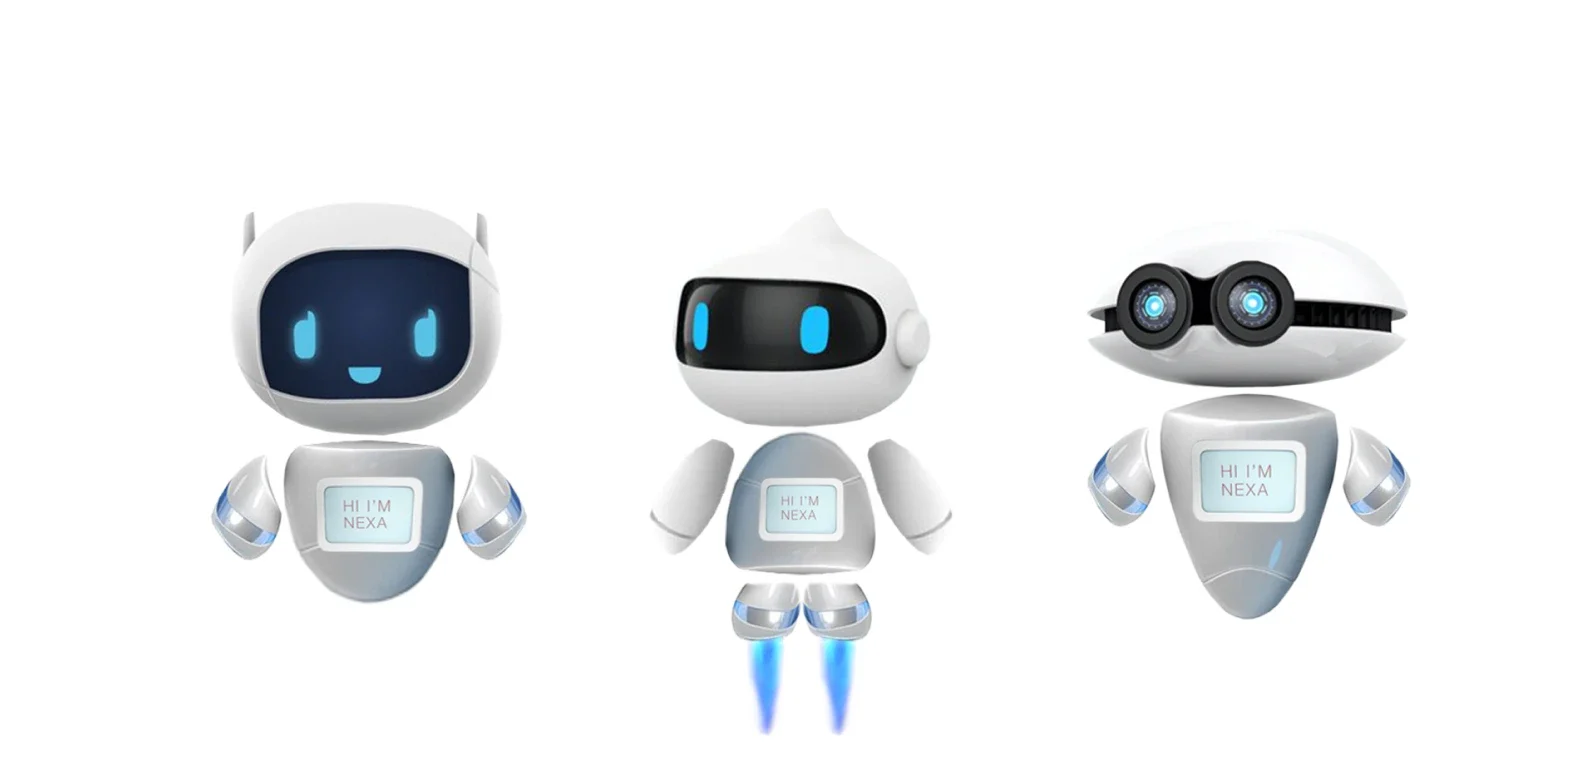 Three fully rendered design options for Ena. The design we chose is on the far right, with the other two having bigger faces, different shaped bodies and more visible boosters.